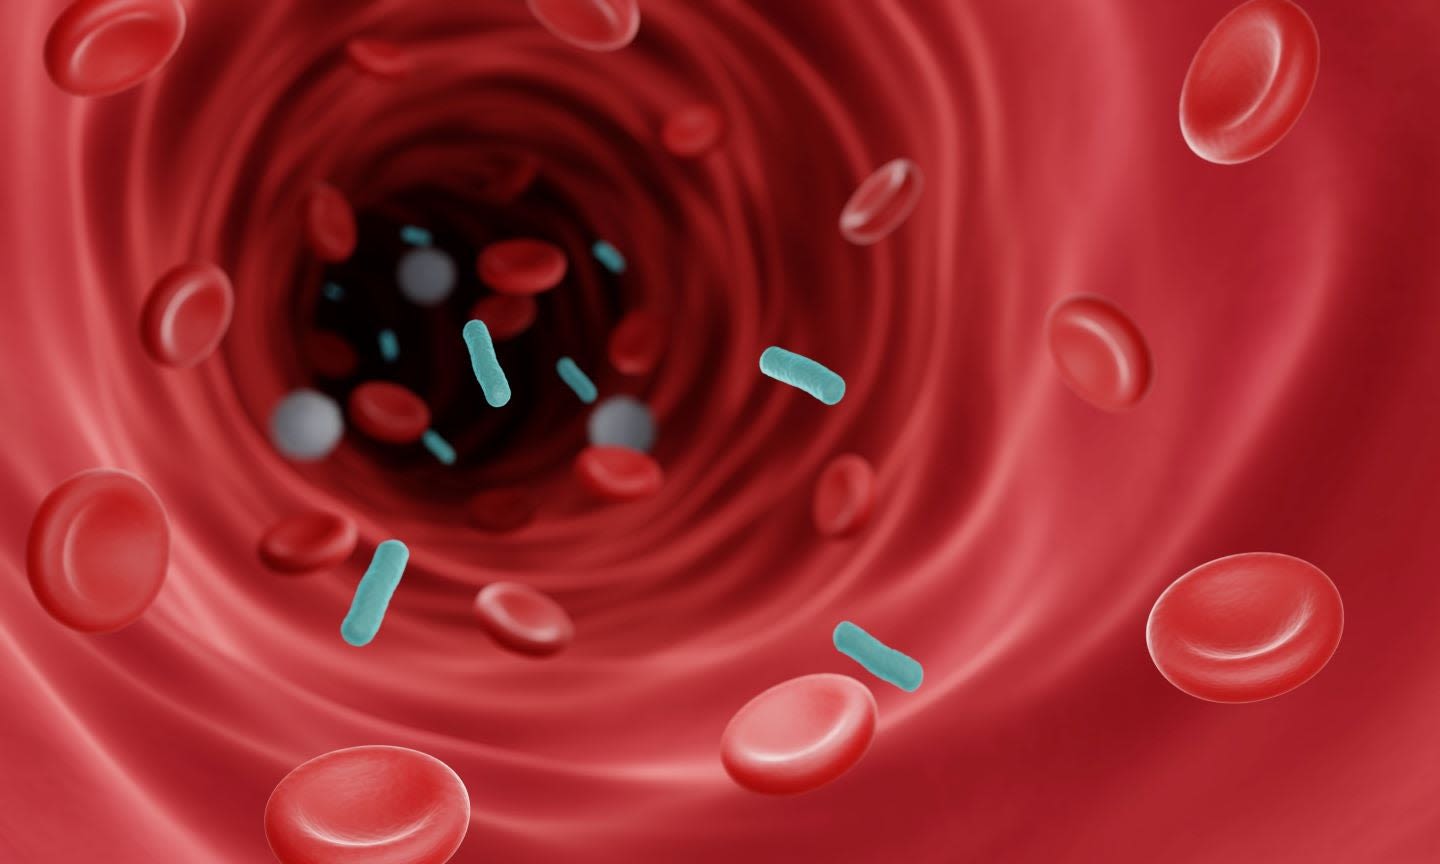 NIH-supported trial of acetaminophen shows benefit in sepsis patients